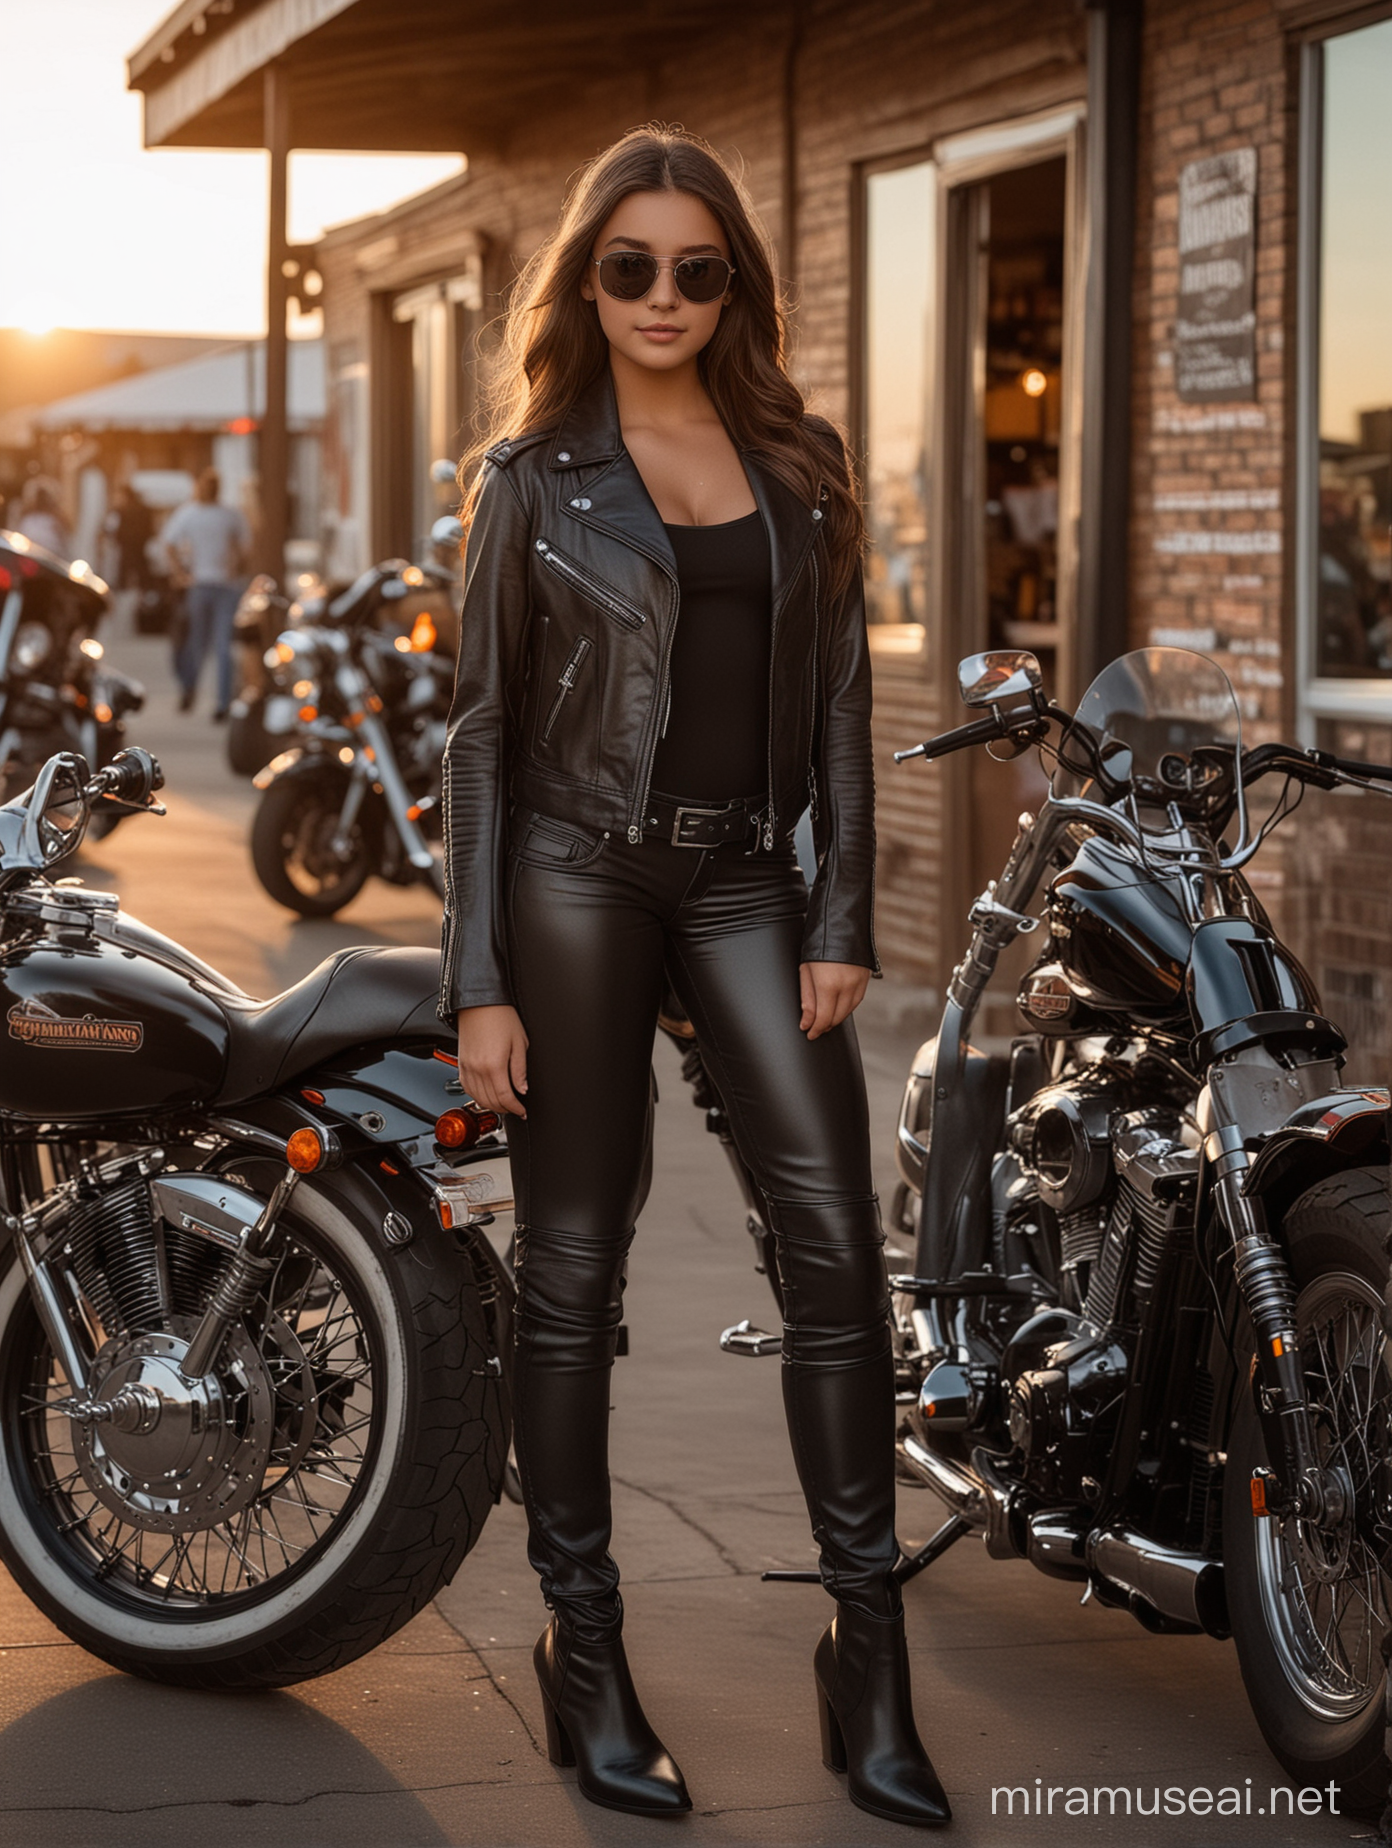 14 year old sweet cute adorable angel long straight wavy brunette hair brown eyes wearing a tight black leather outfit l she is extremely cute standing towards the viewer full body full view dark sunglasses at sunset standing next to a Harley Davidson in front of a biker bar 